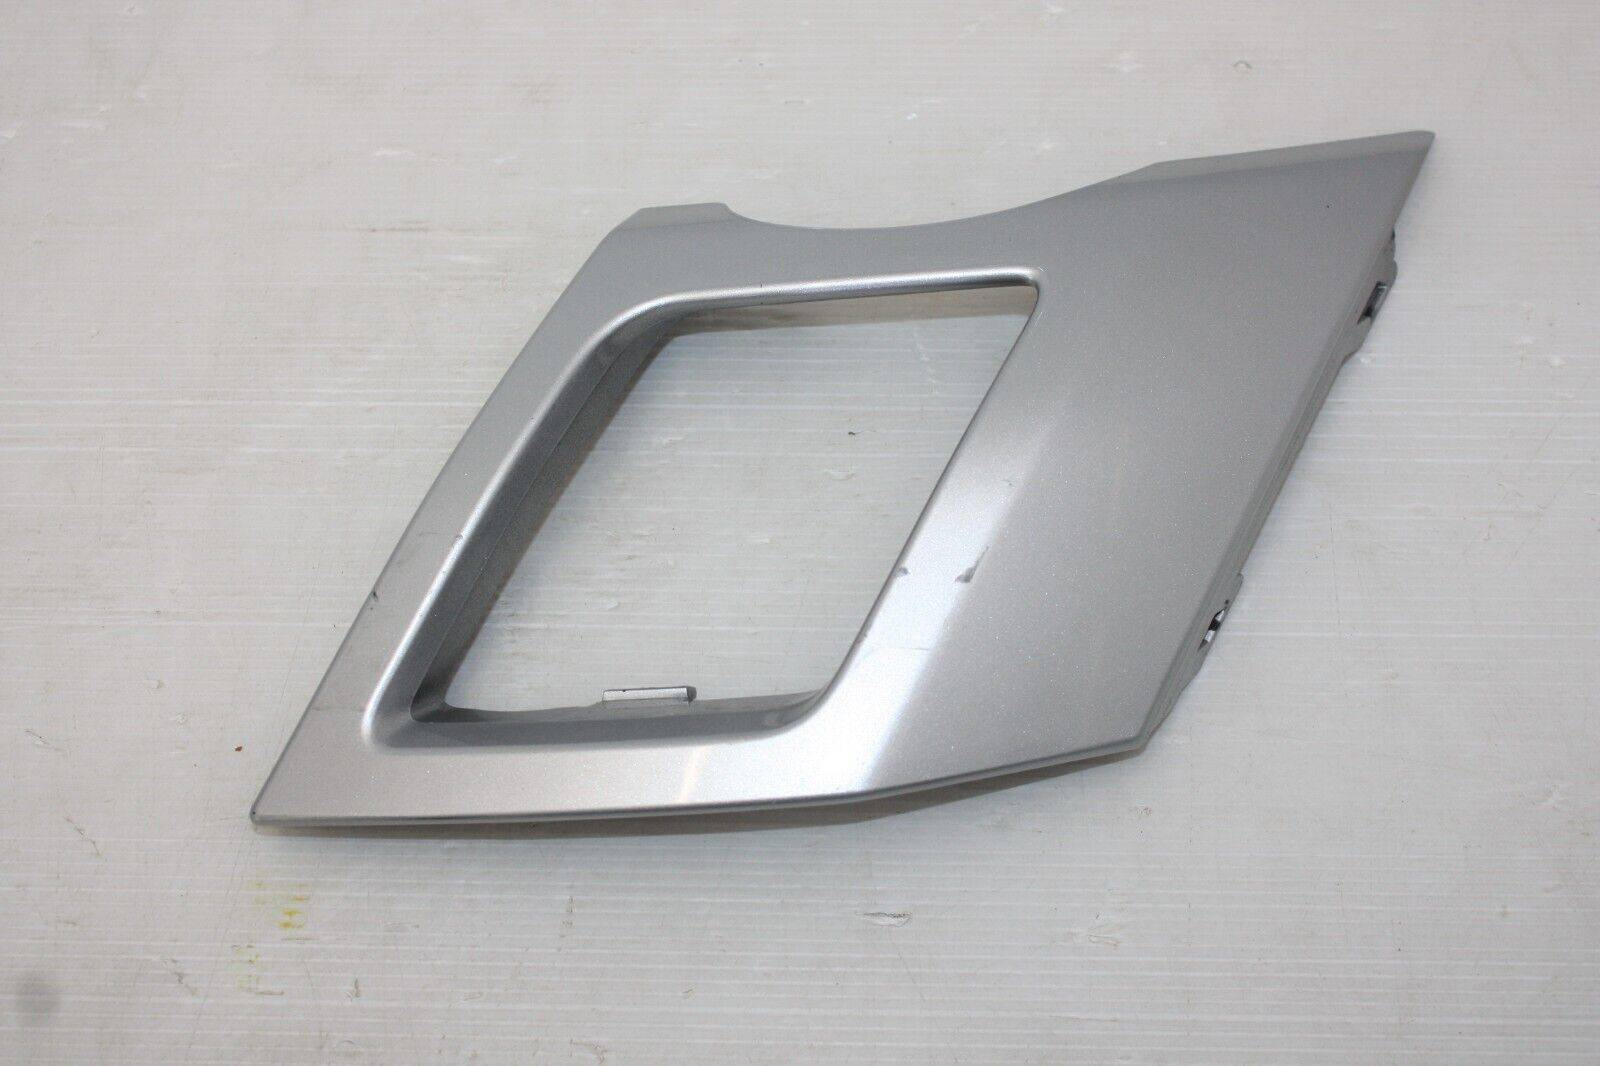 Land Rover Discovery Dynamic Rear Bumper Left Trim HY3M 17D53 AA Genuine 175910298014